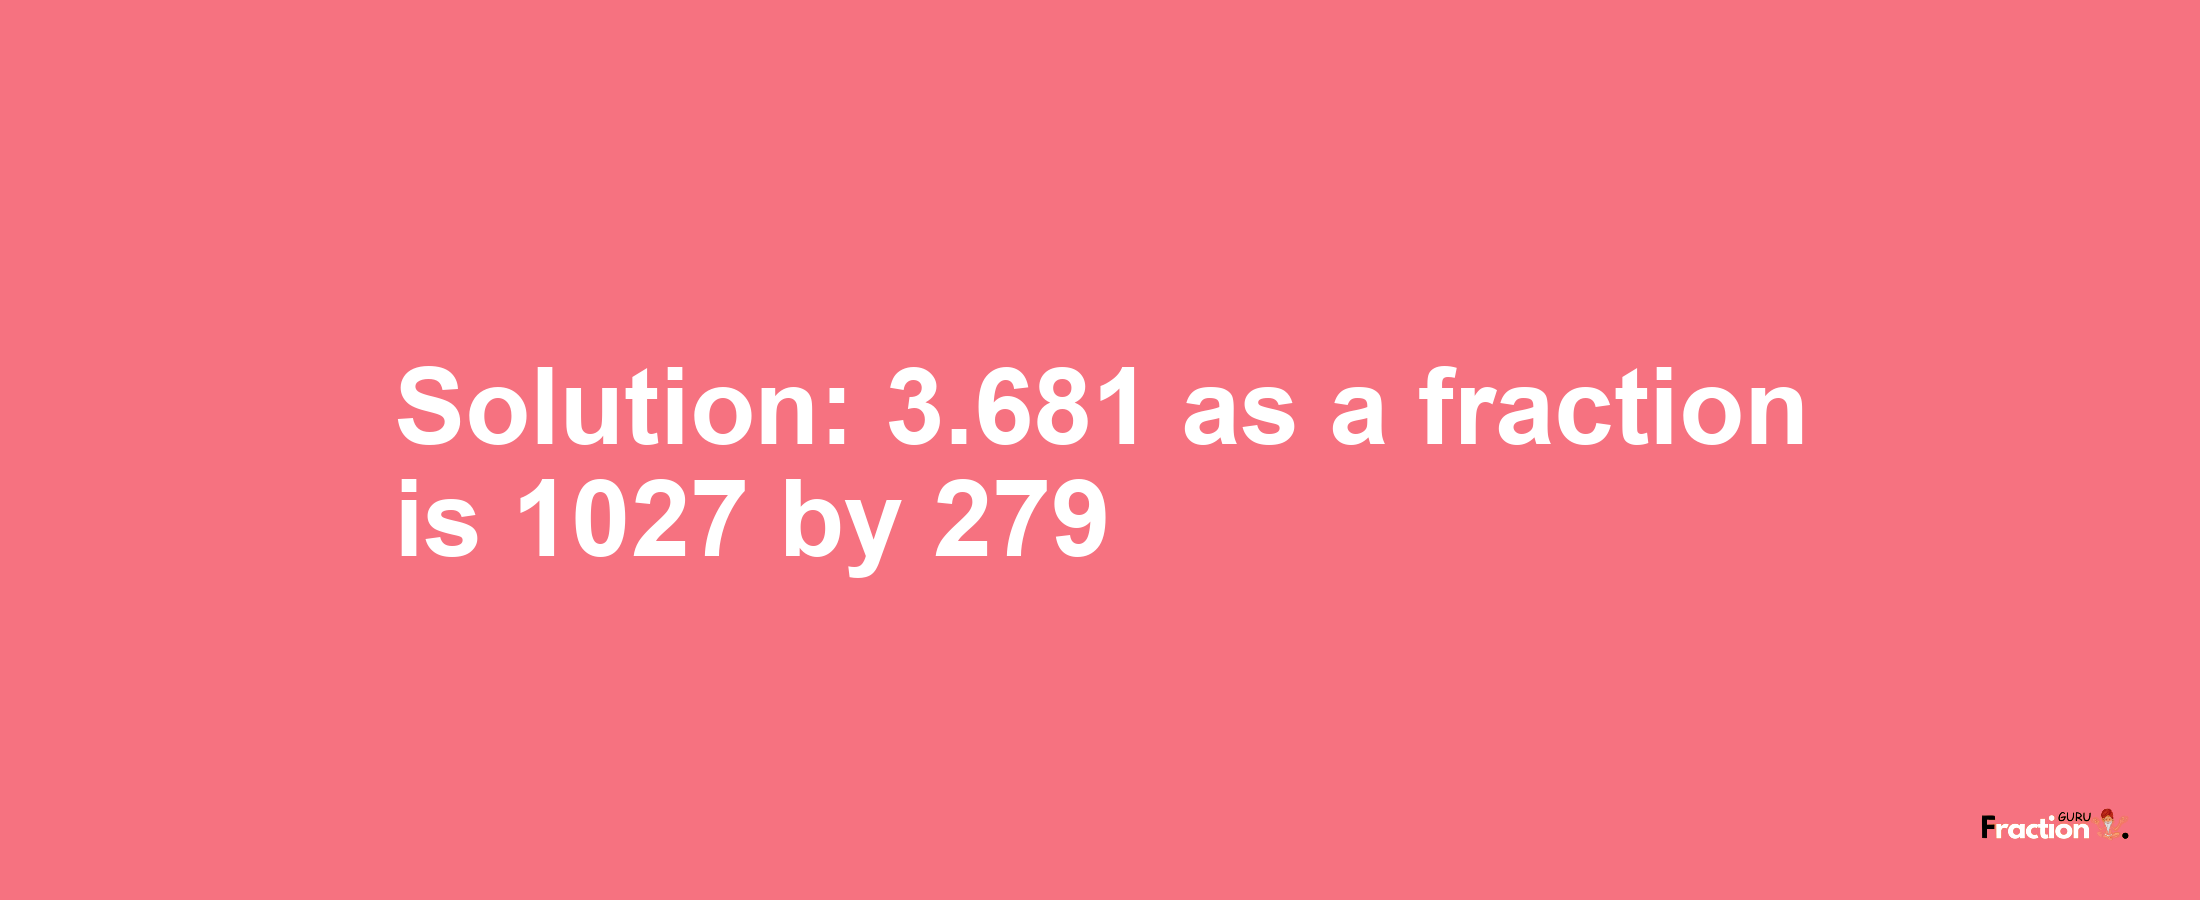 Solution:3.681 as a fraction is 1027/279